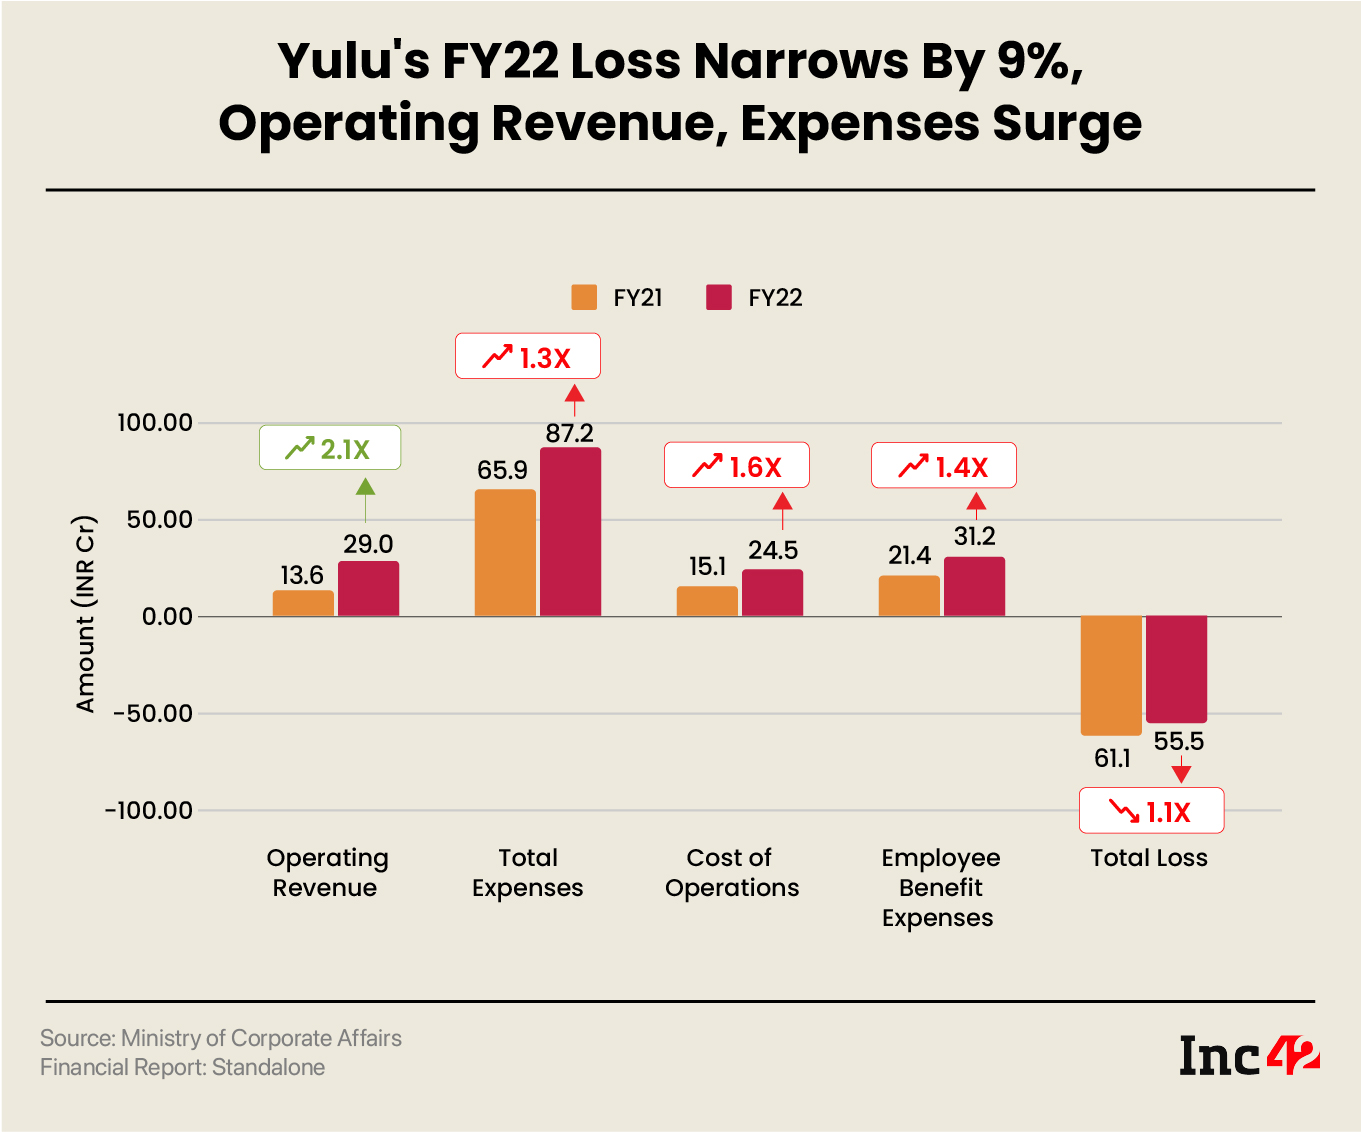 Yulu's FY22 Net Loss Narrows By 9%, Operating Revenue, Expenses Surge